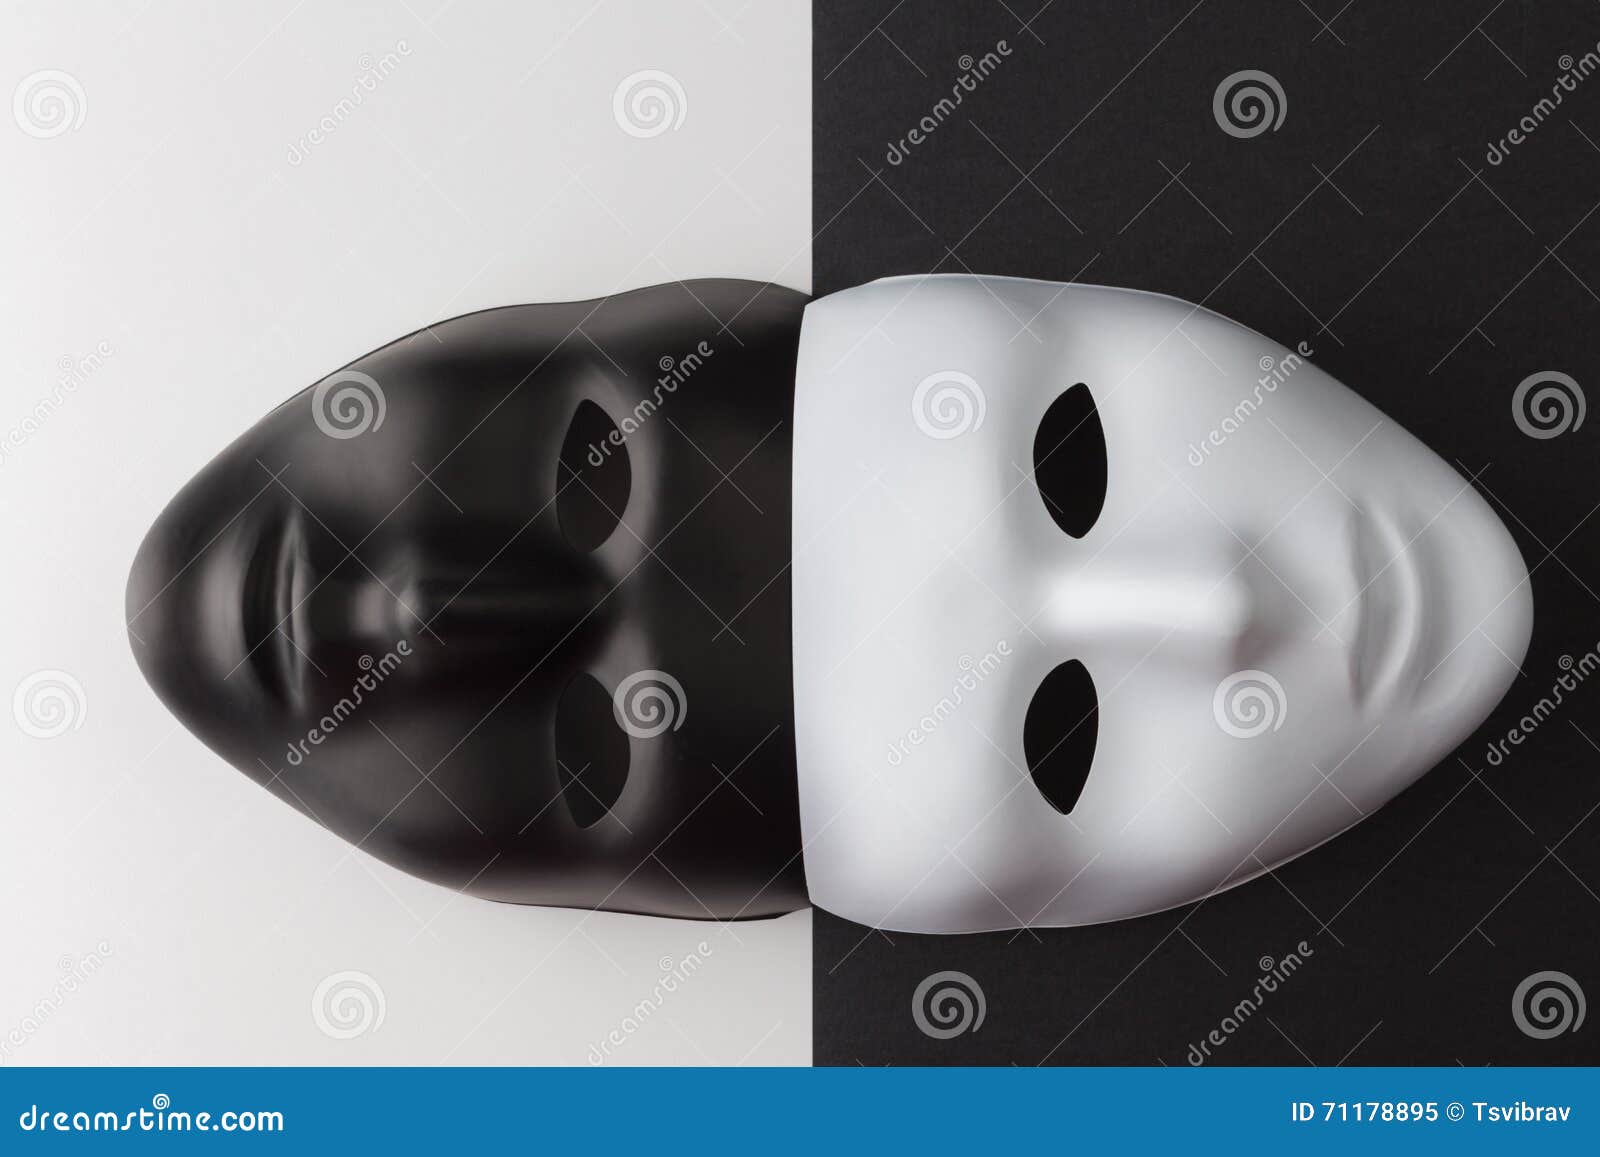 black and white masks anonymity concept